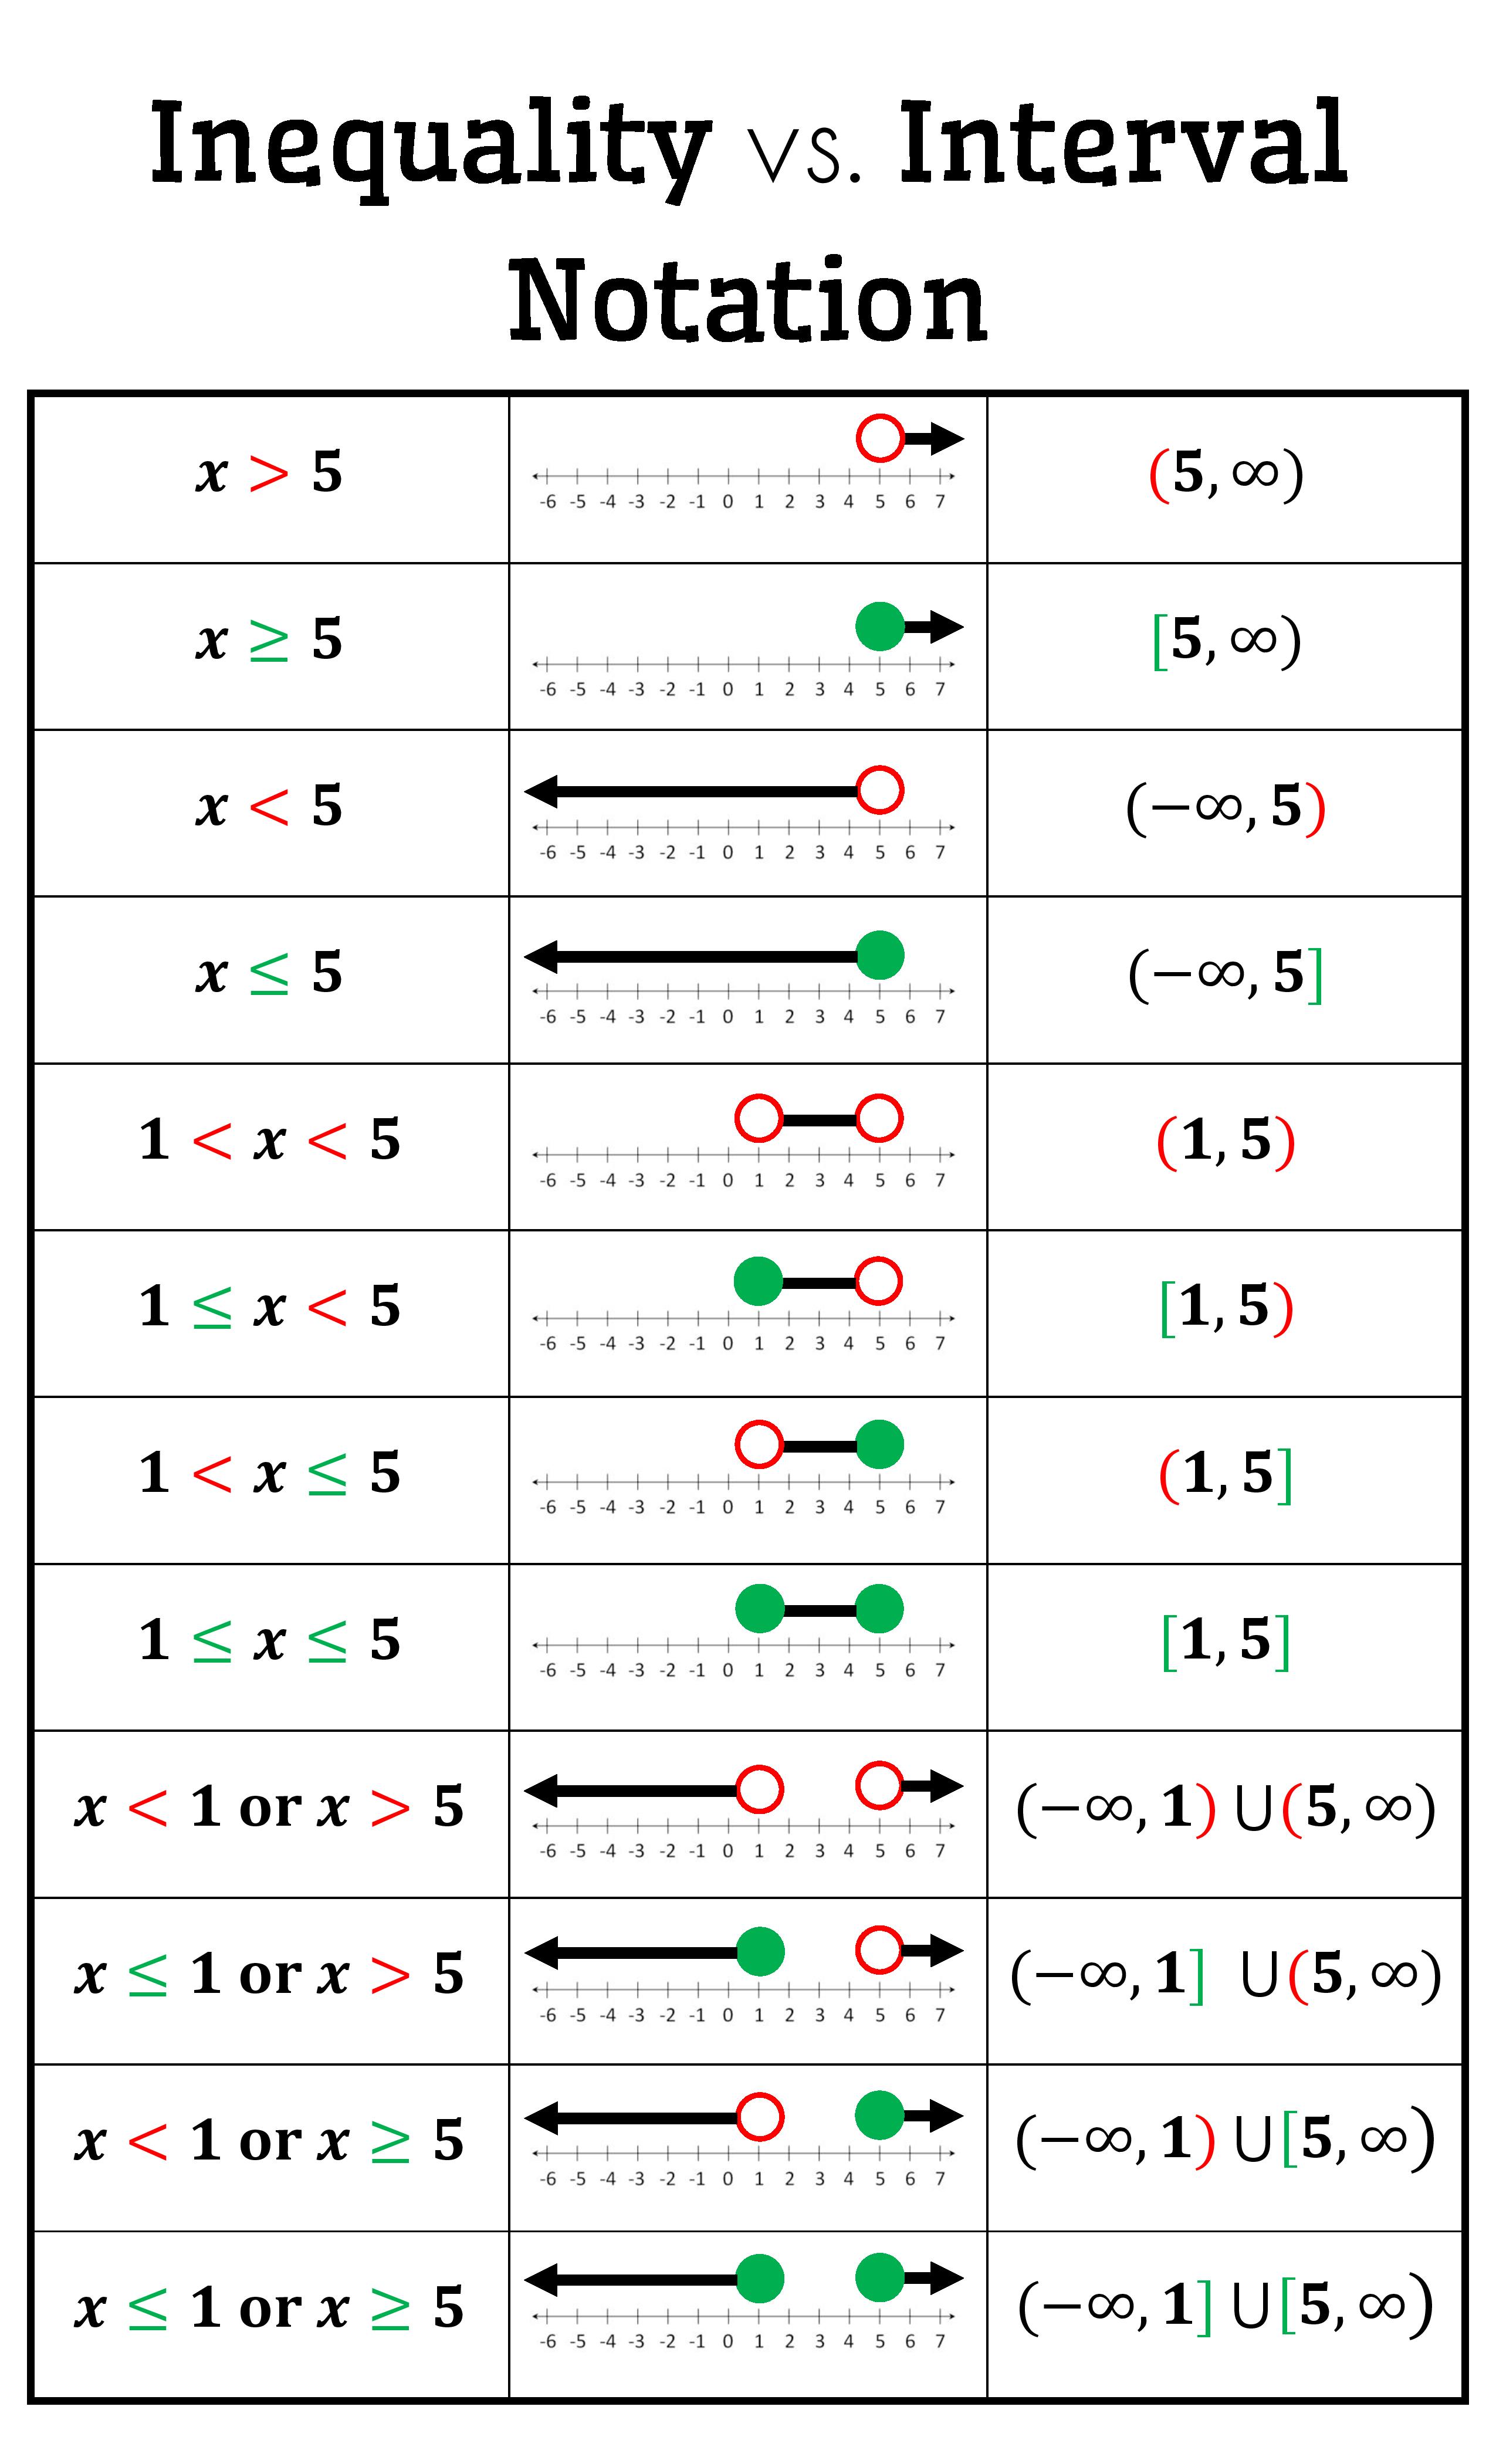 Inequality vs. Interval Notation Poster FREE Download #MTBoSBlaugust